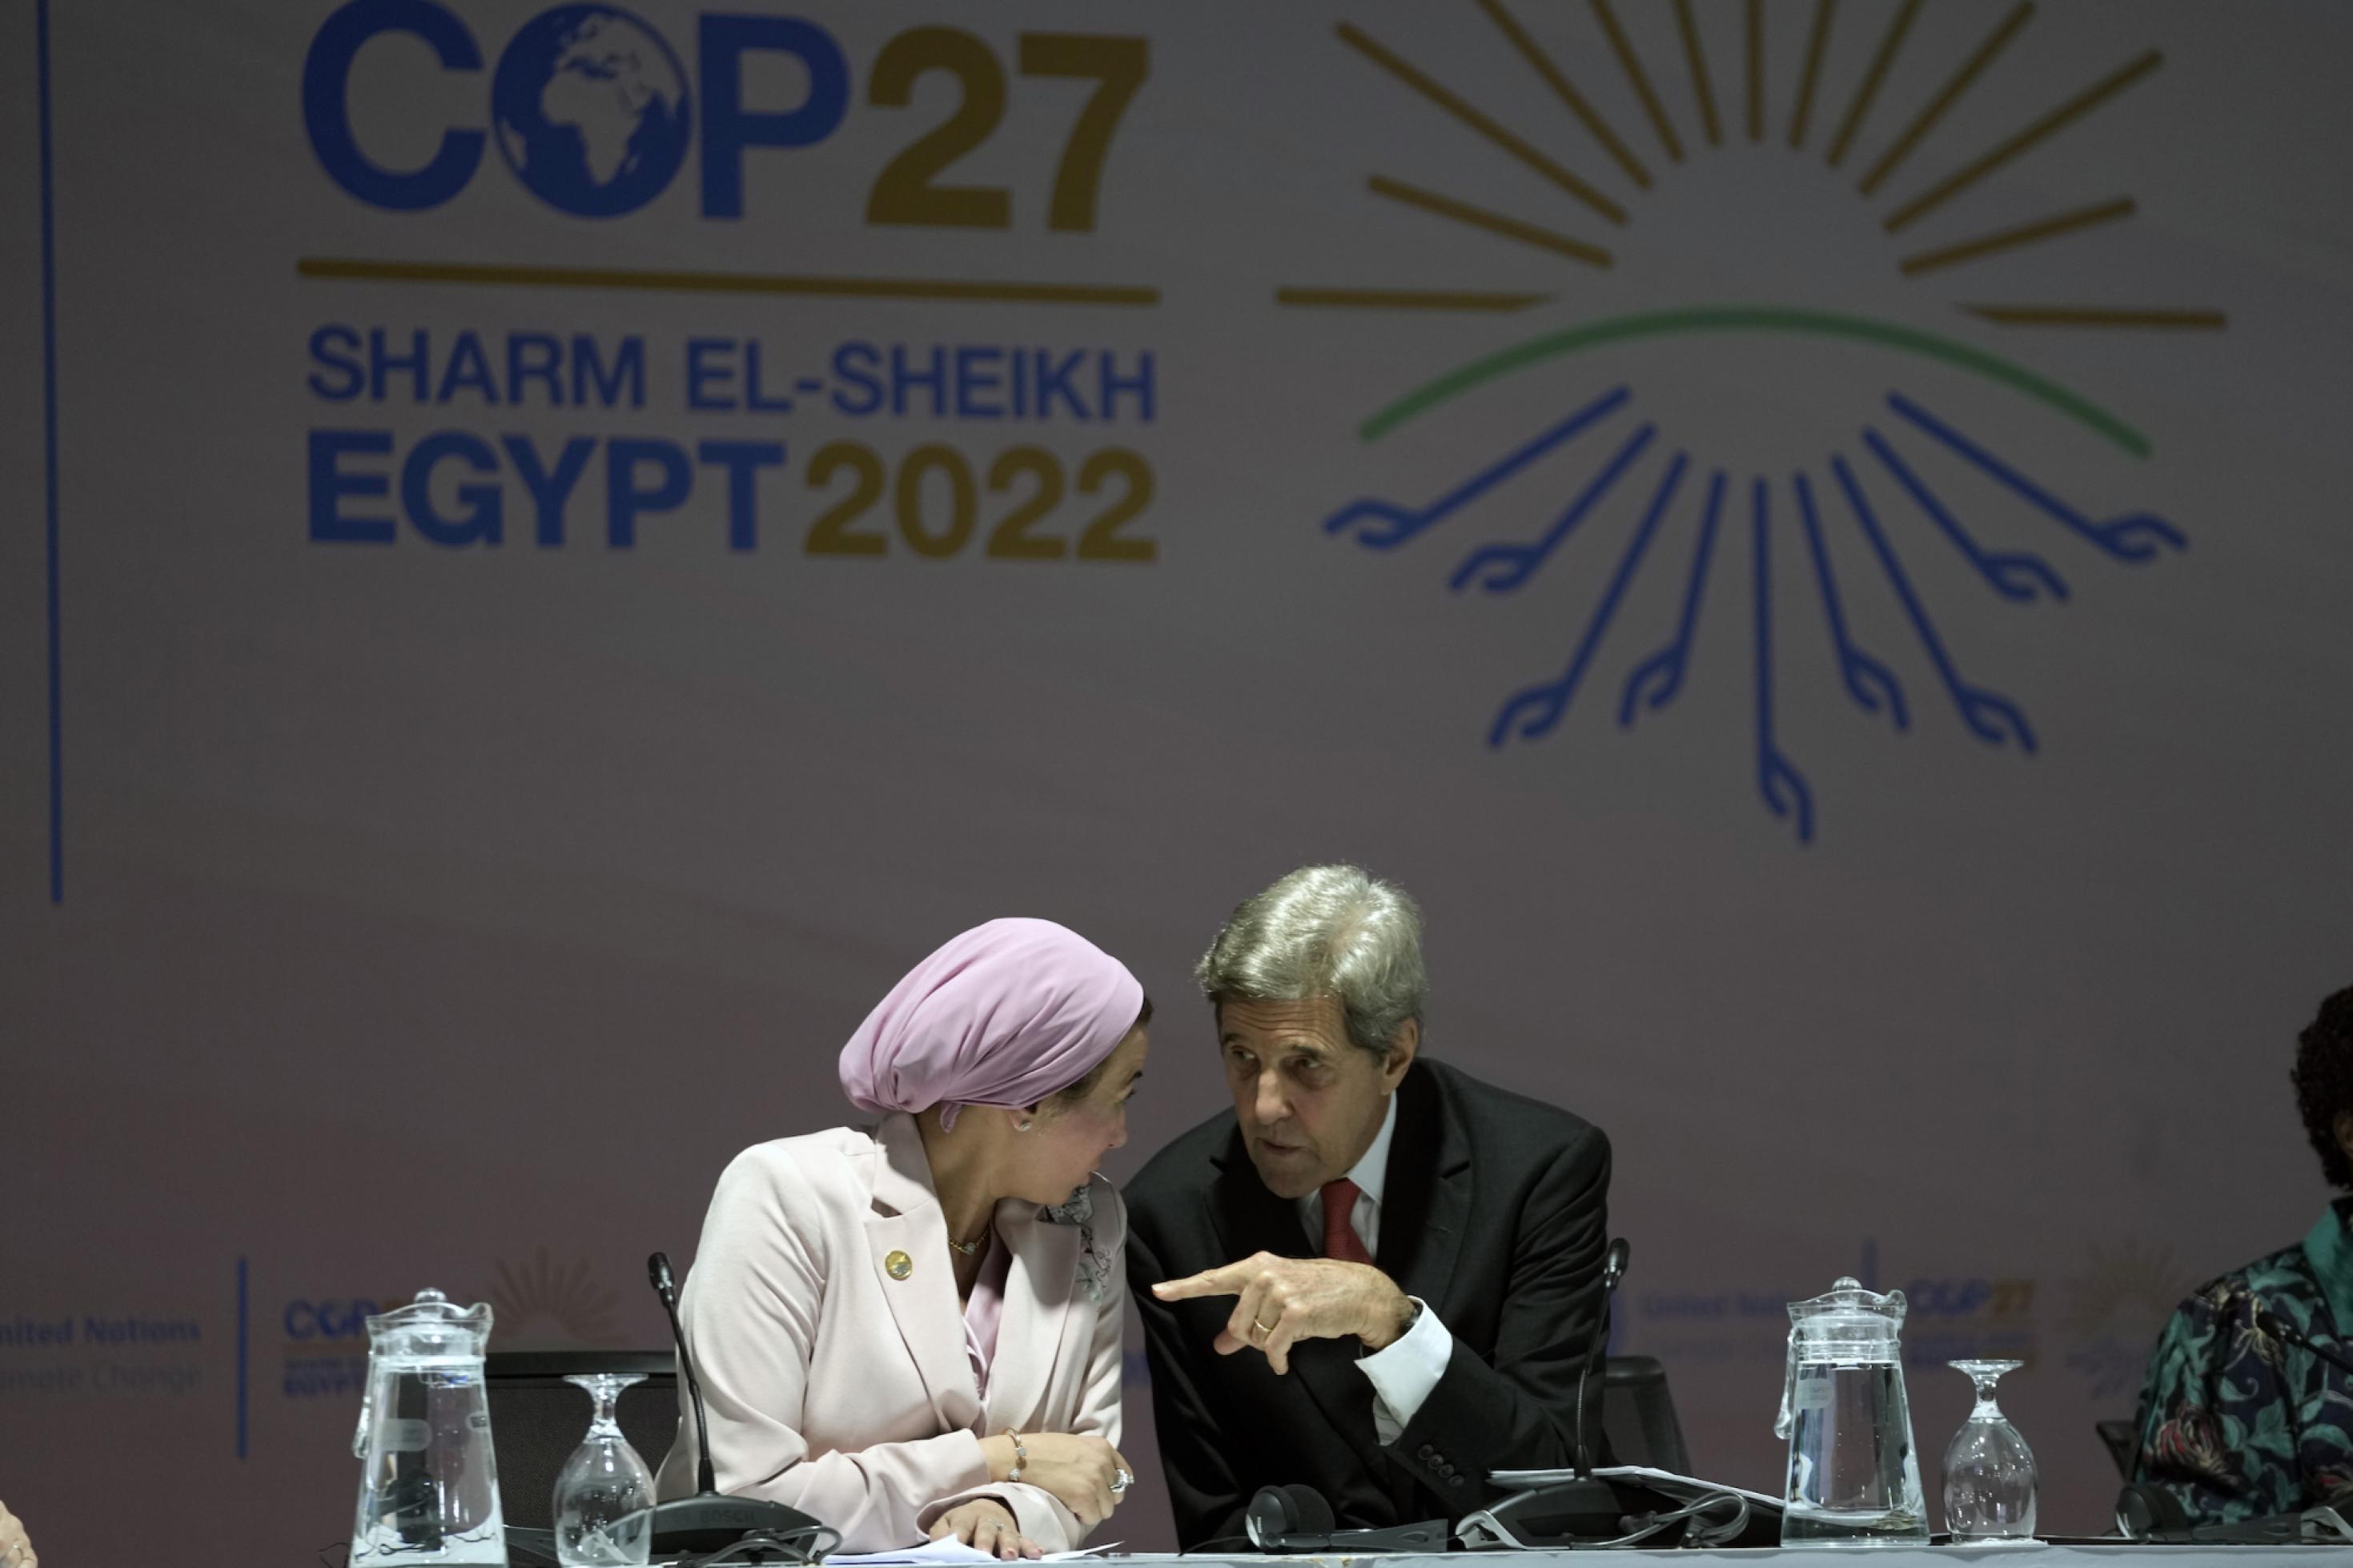 Egypt's Environment Minister Yasmine Fouad, left, and U.S. Special Presidential Envoy for Climate John Kerry talk before a panel on biodiversity at the COP27 U.N. Climate Summit, Wednesday, Nov. 16, 2022, in Sharm el-Sheikh, Egypt.